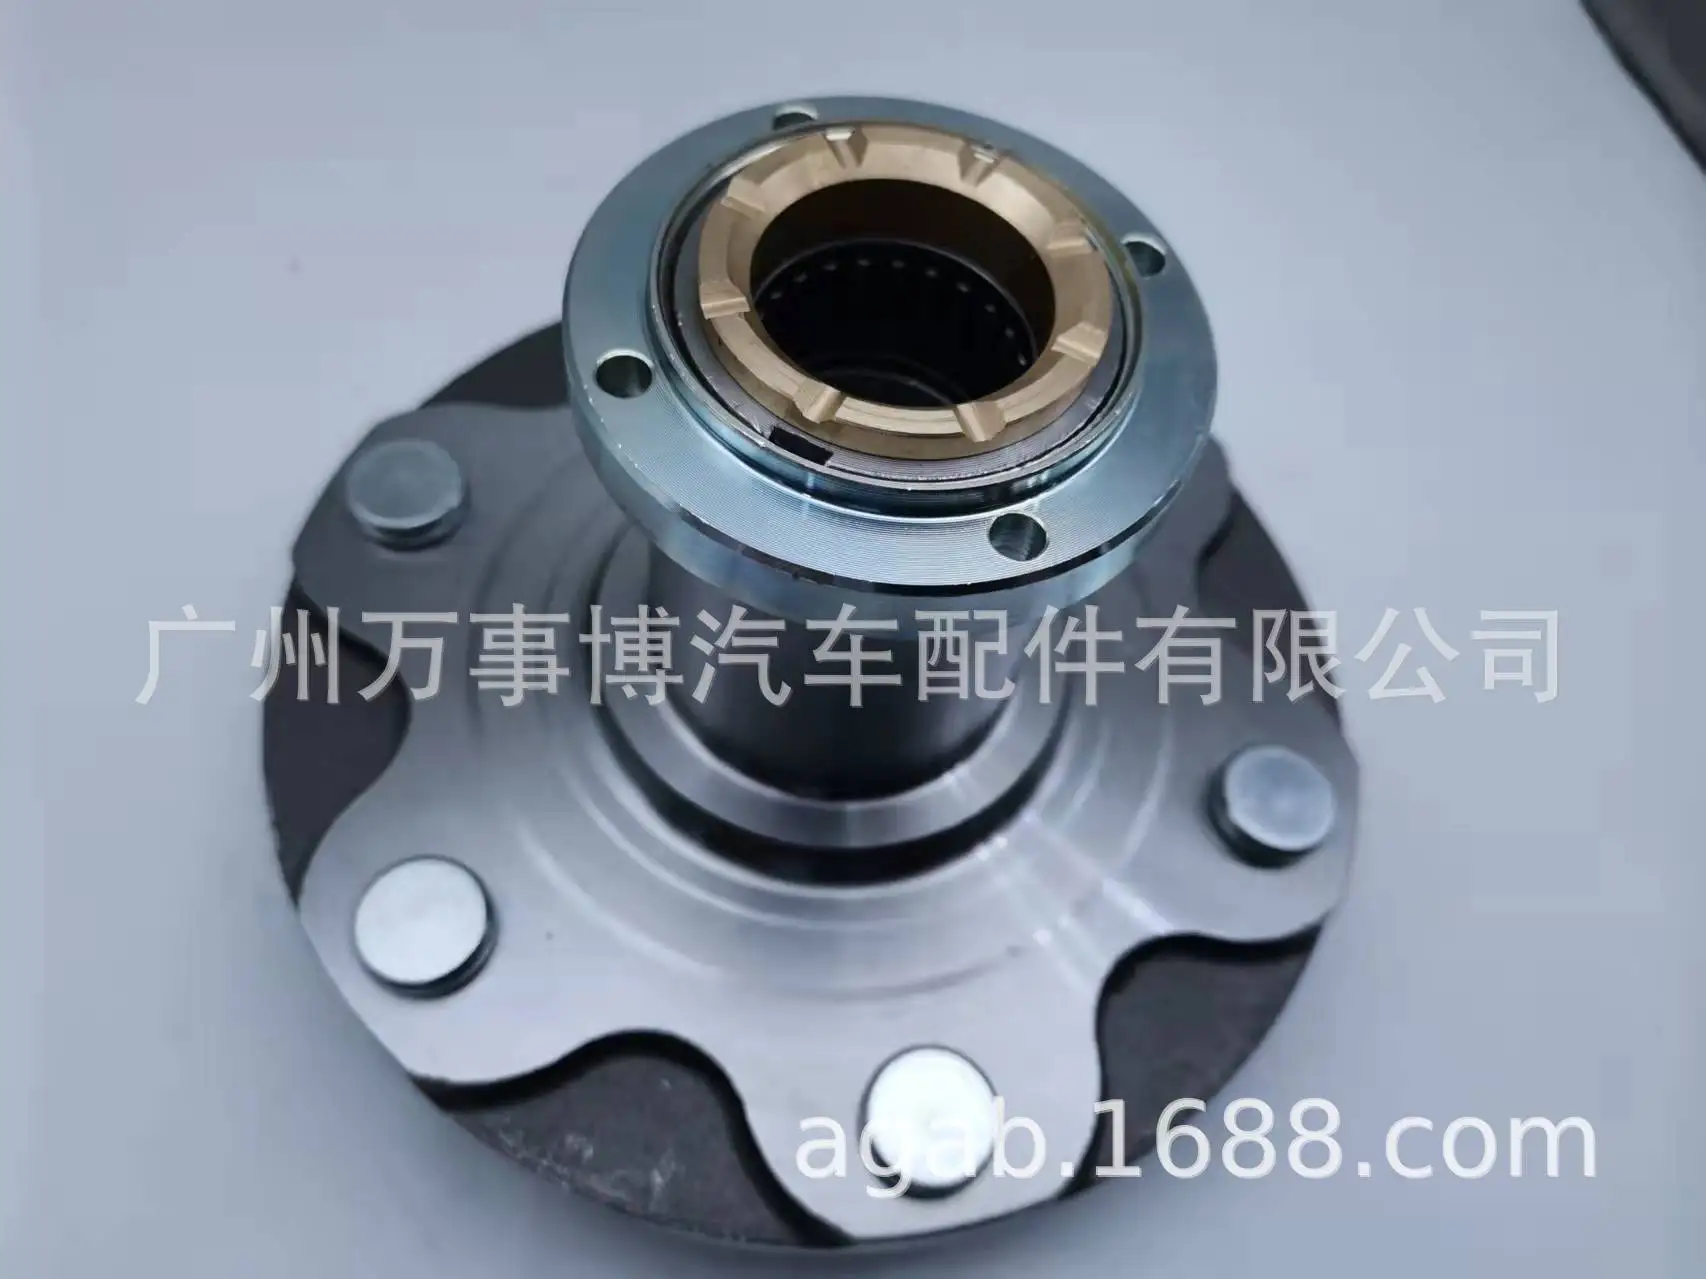 Front Wheel Hub Bearing Assembly for GSK30/UCK35/VCK30, 43502-35110/43502-0C010